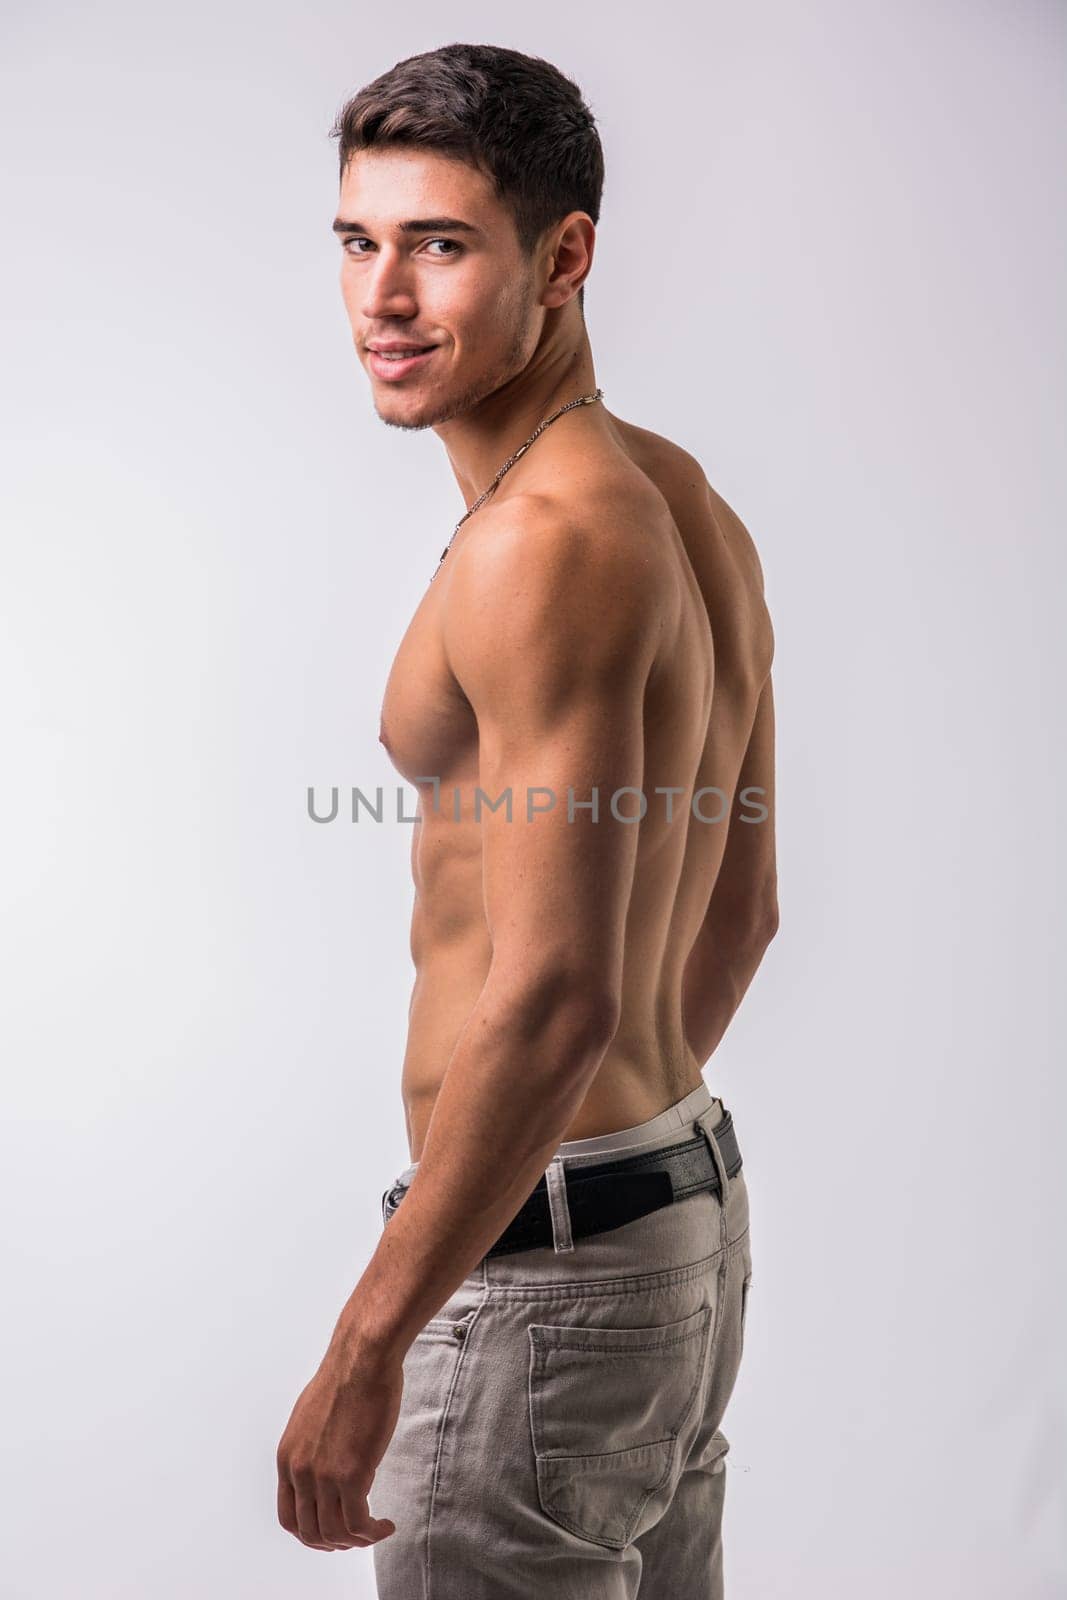 Photo of a shirtless man posing confidently for a photo by artofphoto